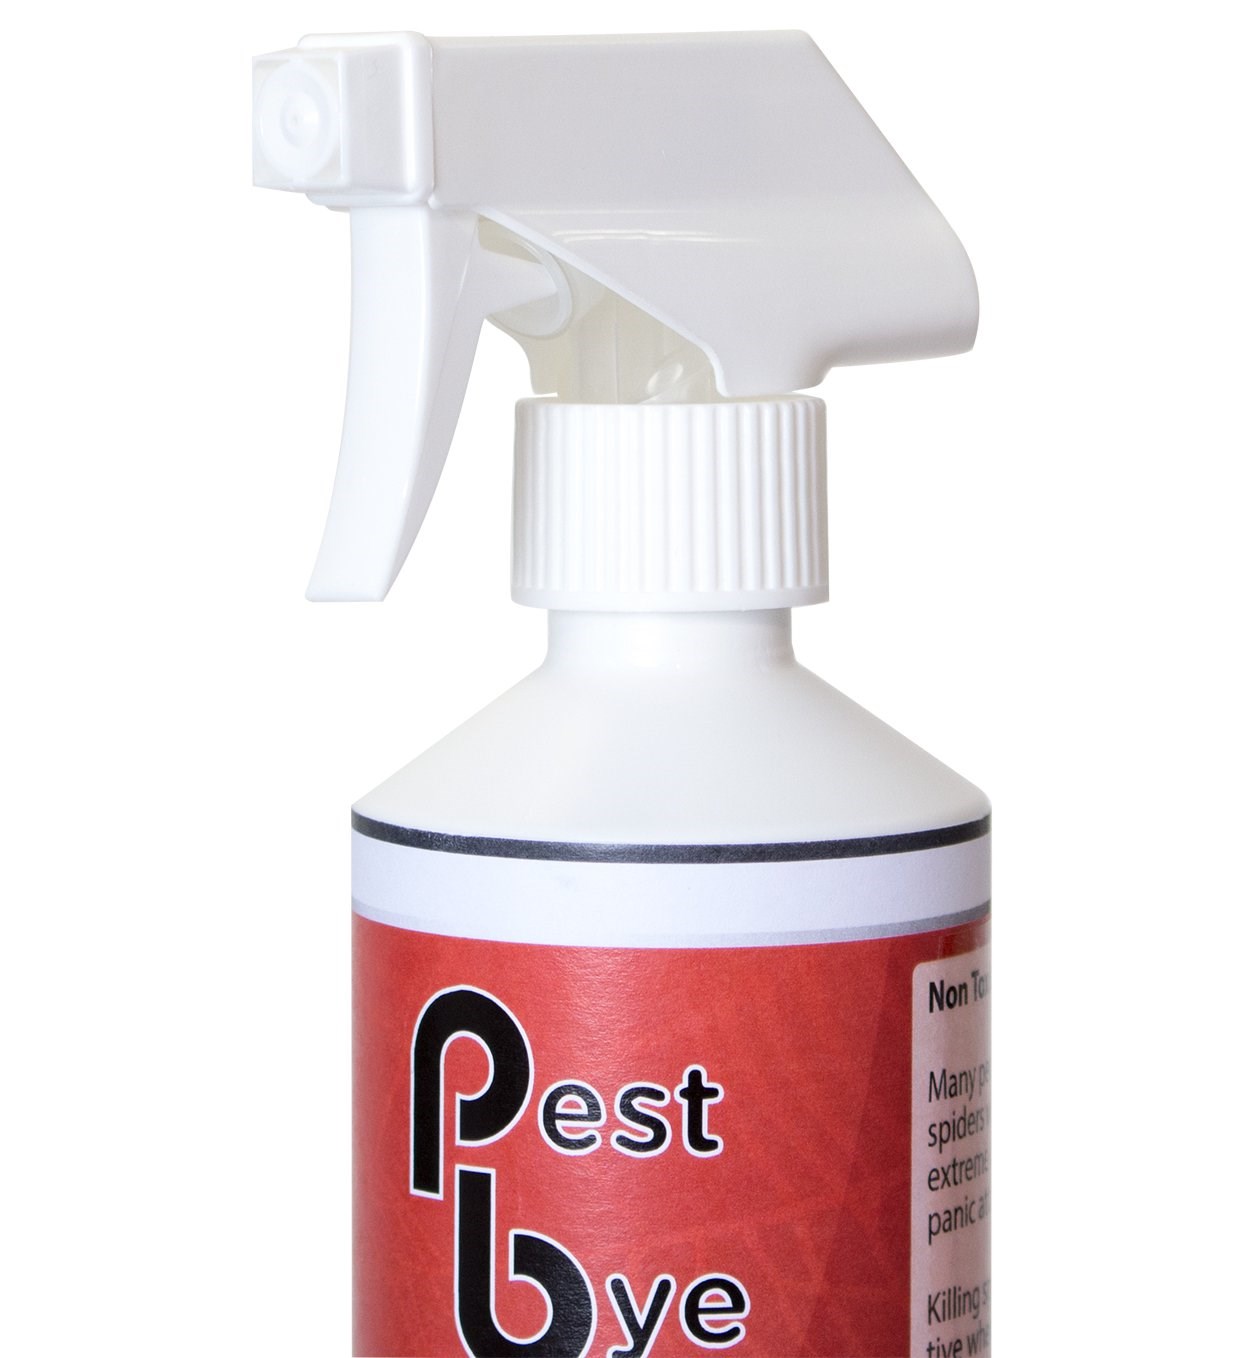 Get Rid of Spiders Spray By PestBye®